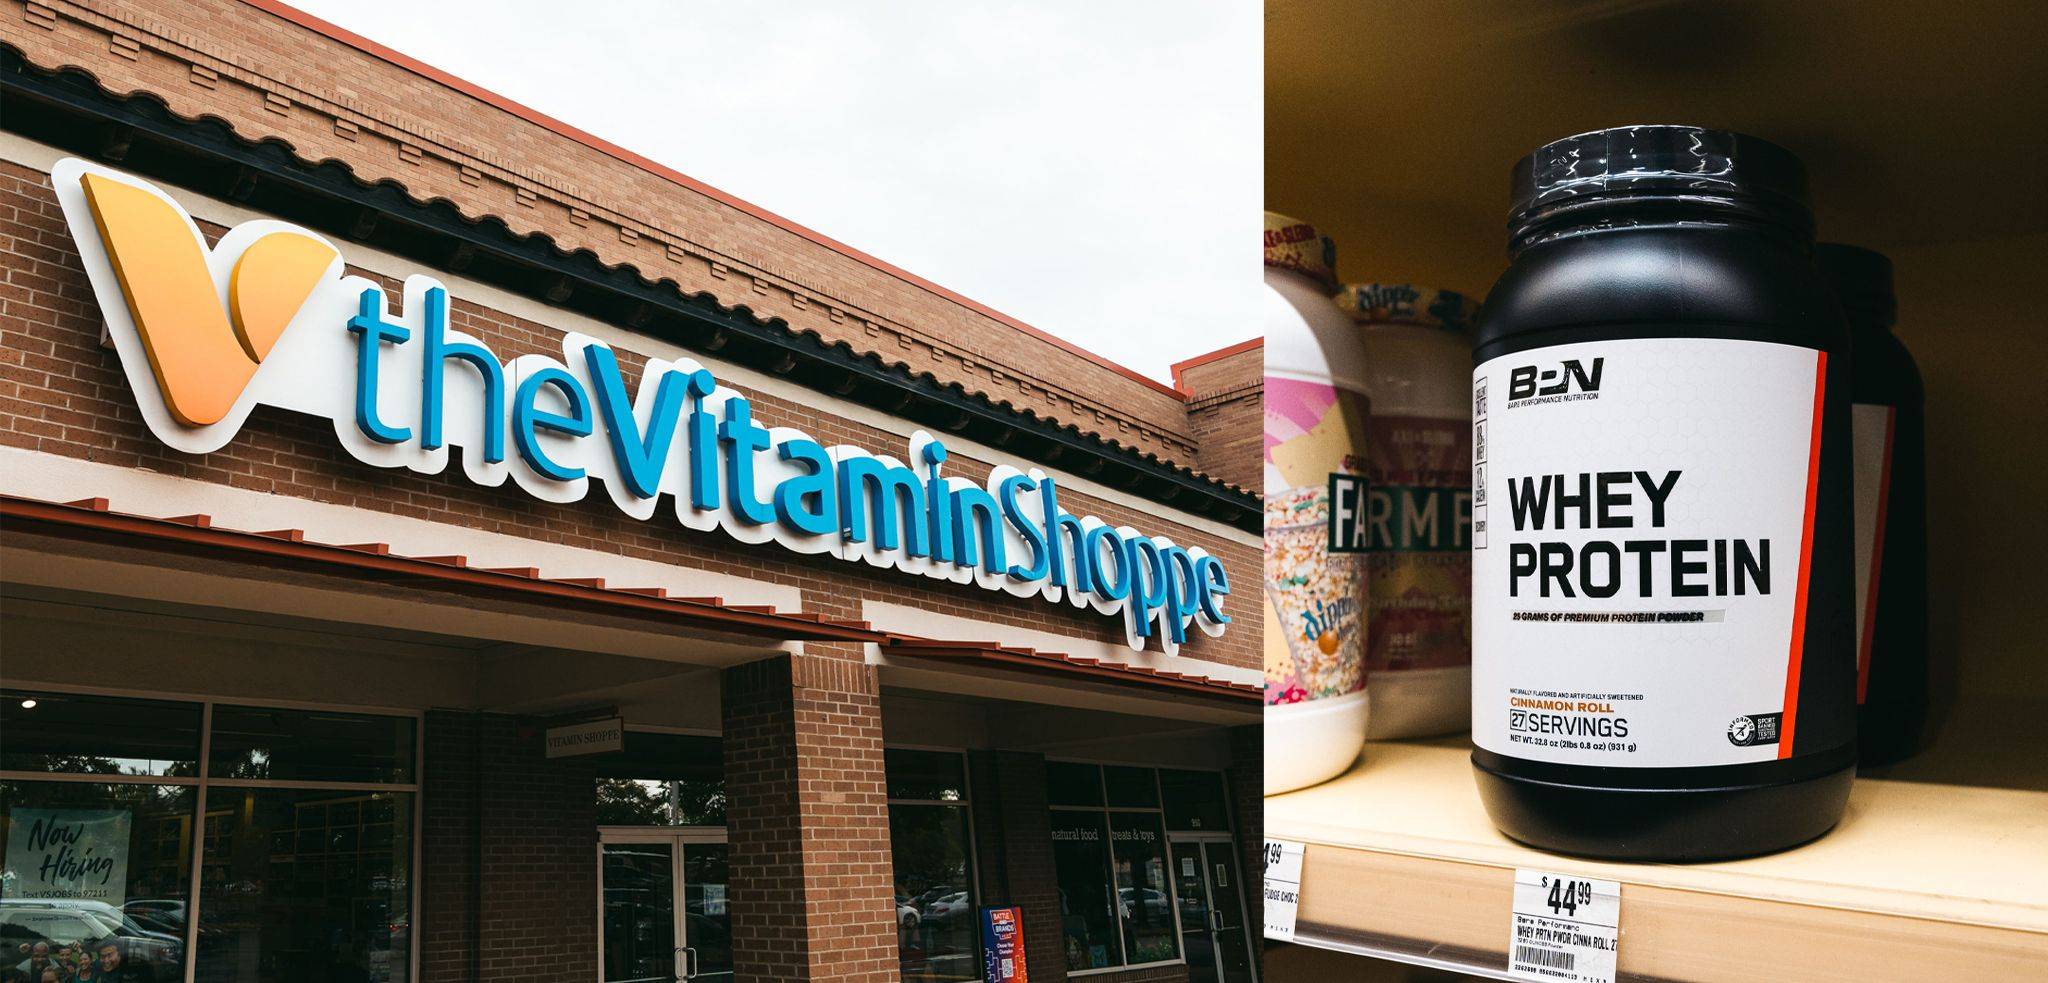 BPN supplements in Vitamin Shoppe stores